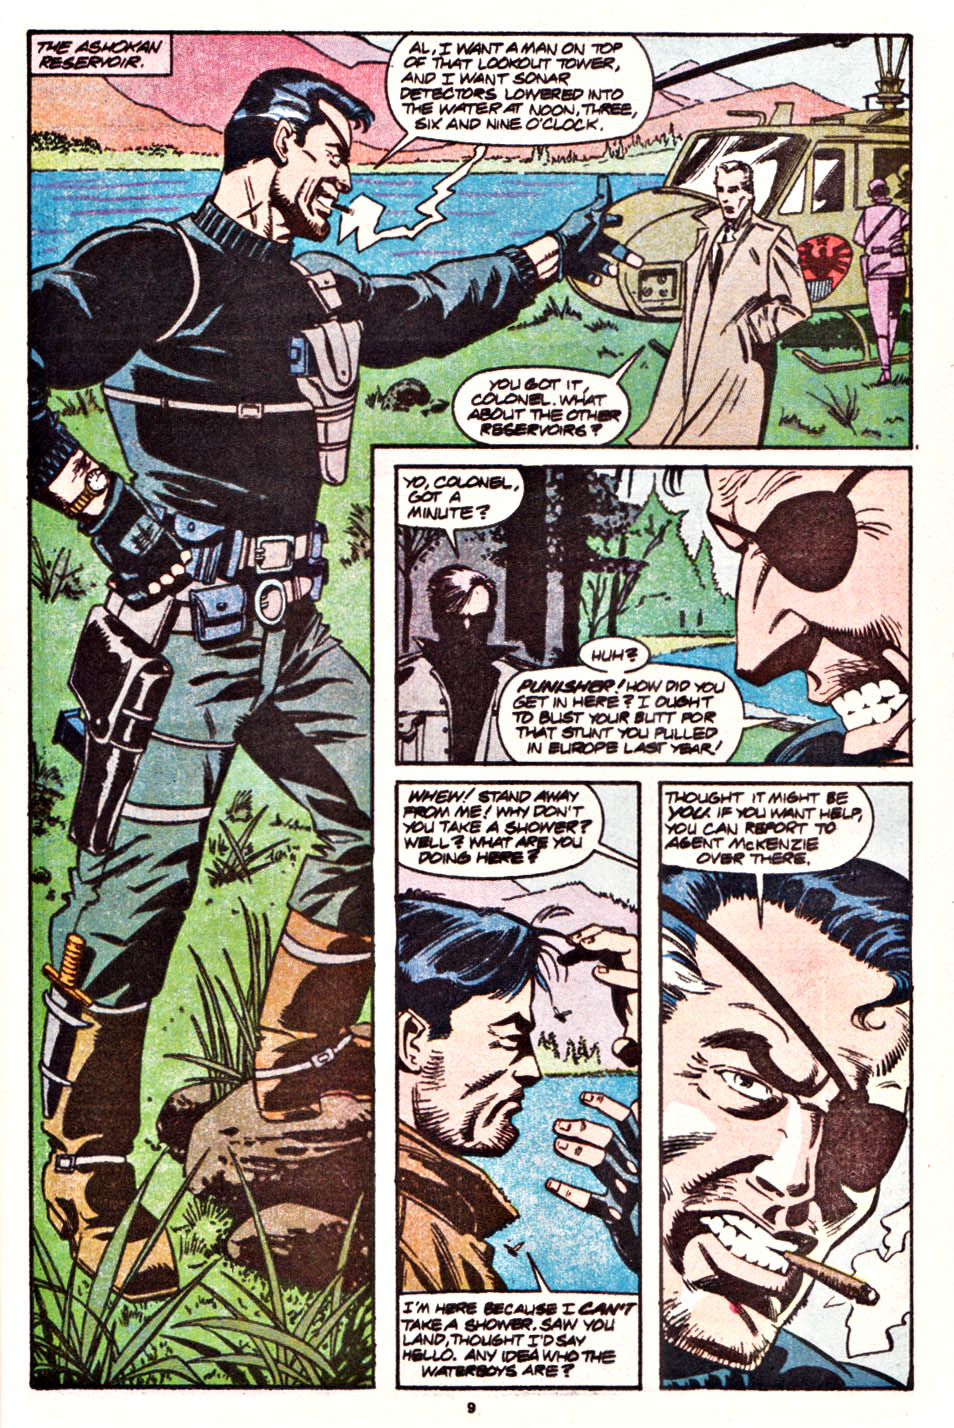 The Punisher (1987) issue 41 - Should a Gentleman offer a Tiparillo to a Lady - Page 8